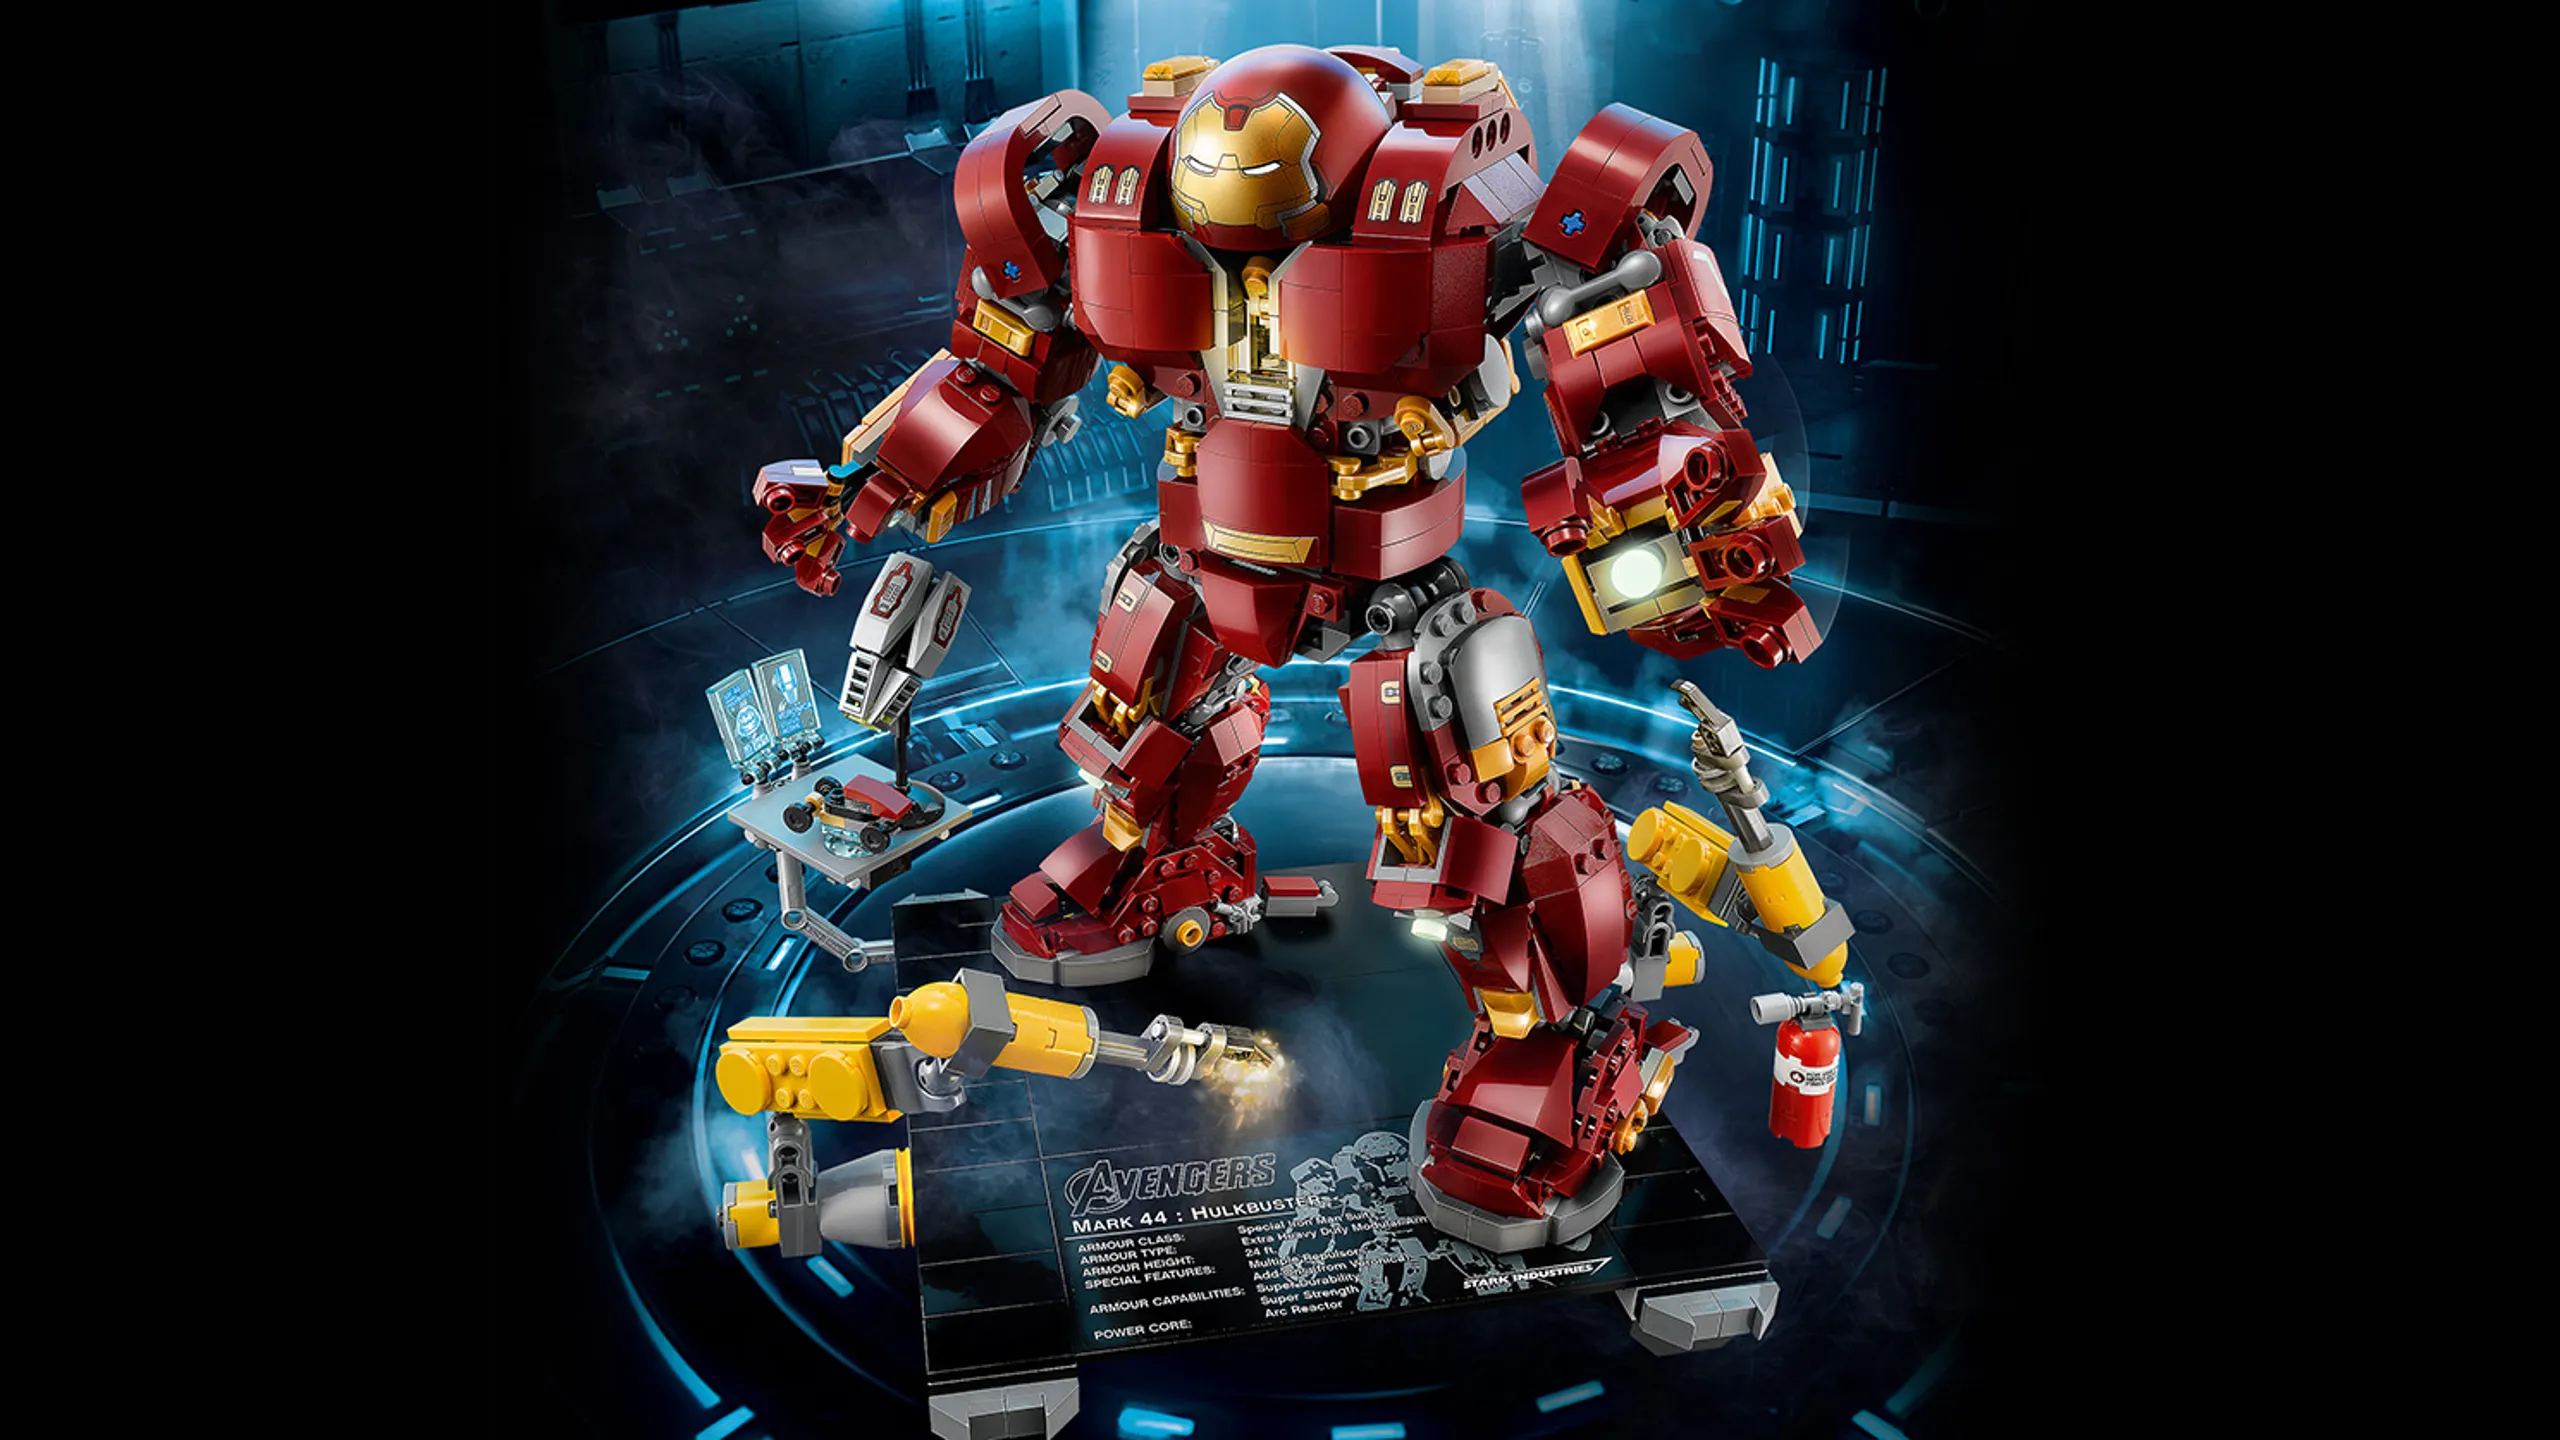 LEGO Super Heroes - 76105 The Hulkbuster: Ultron Edition - Build your own LEGO brick version of the heroic Hulkbuster! Rotate the mech’s torso and adjust the fingers, arms, legs and feet to create awesome battle poses.